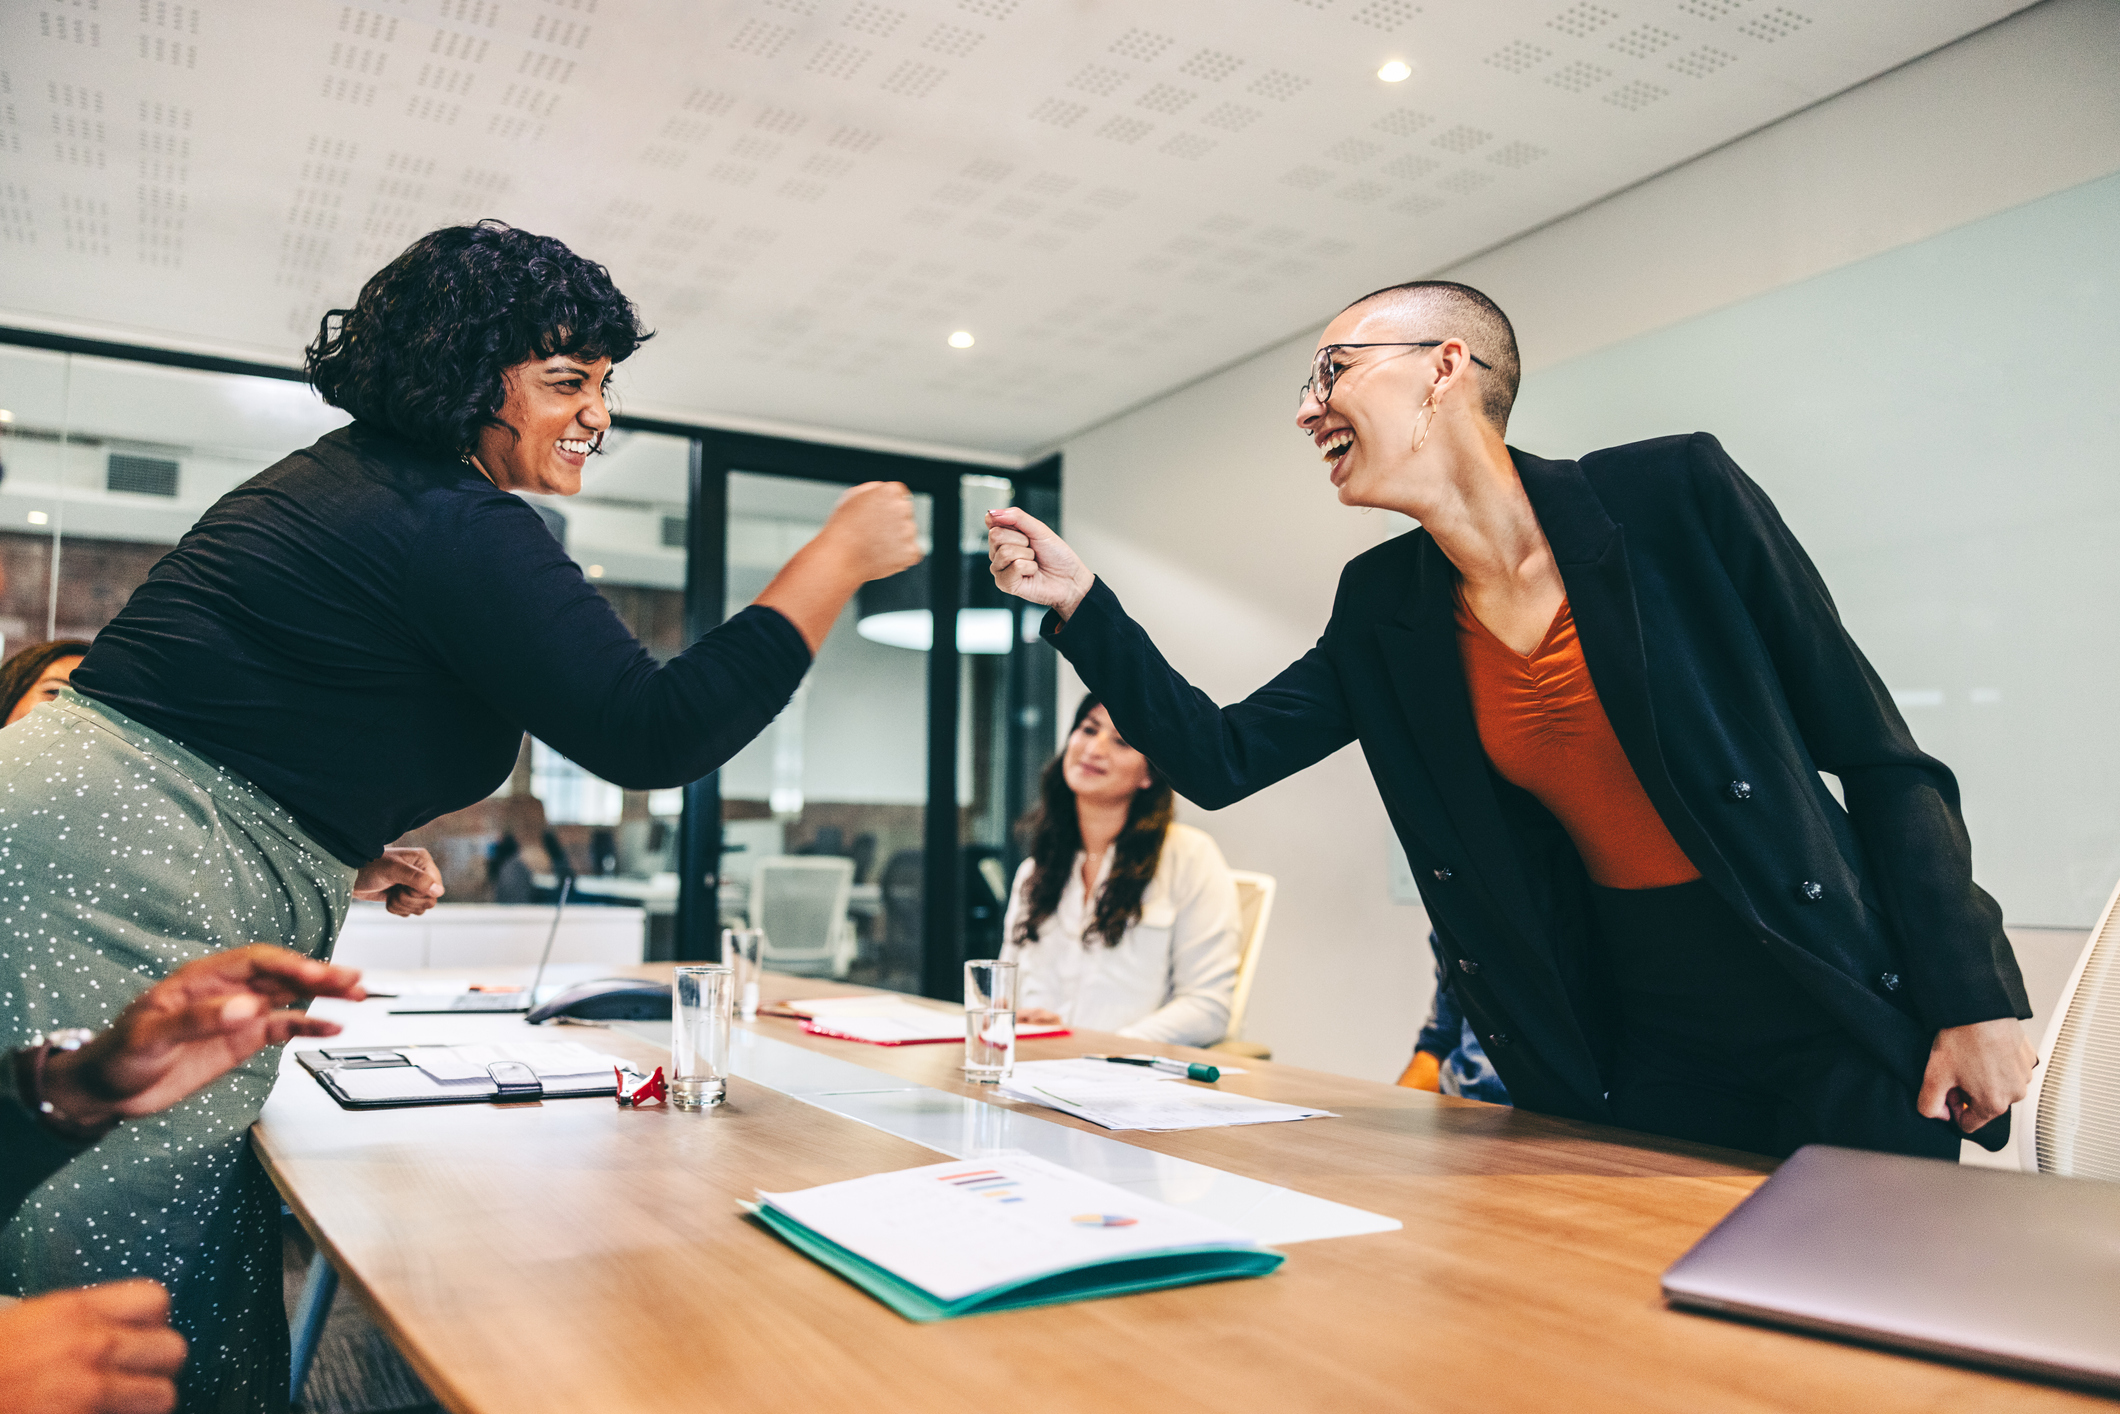 Stock image of two women standing up at conference table and leaning over to give each other a fist bump while smiling